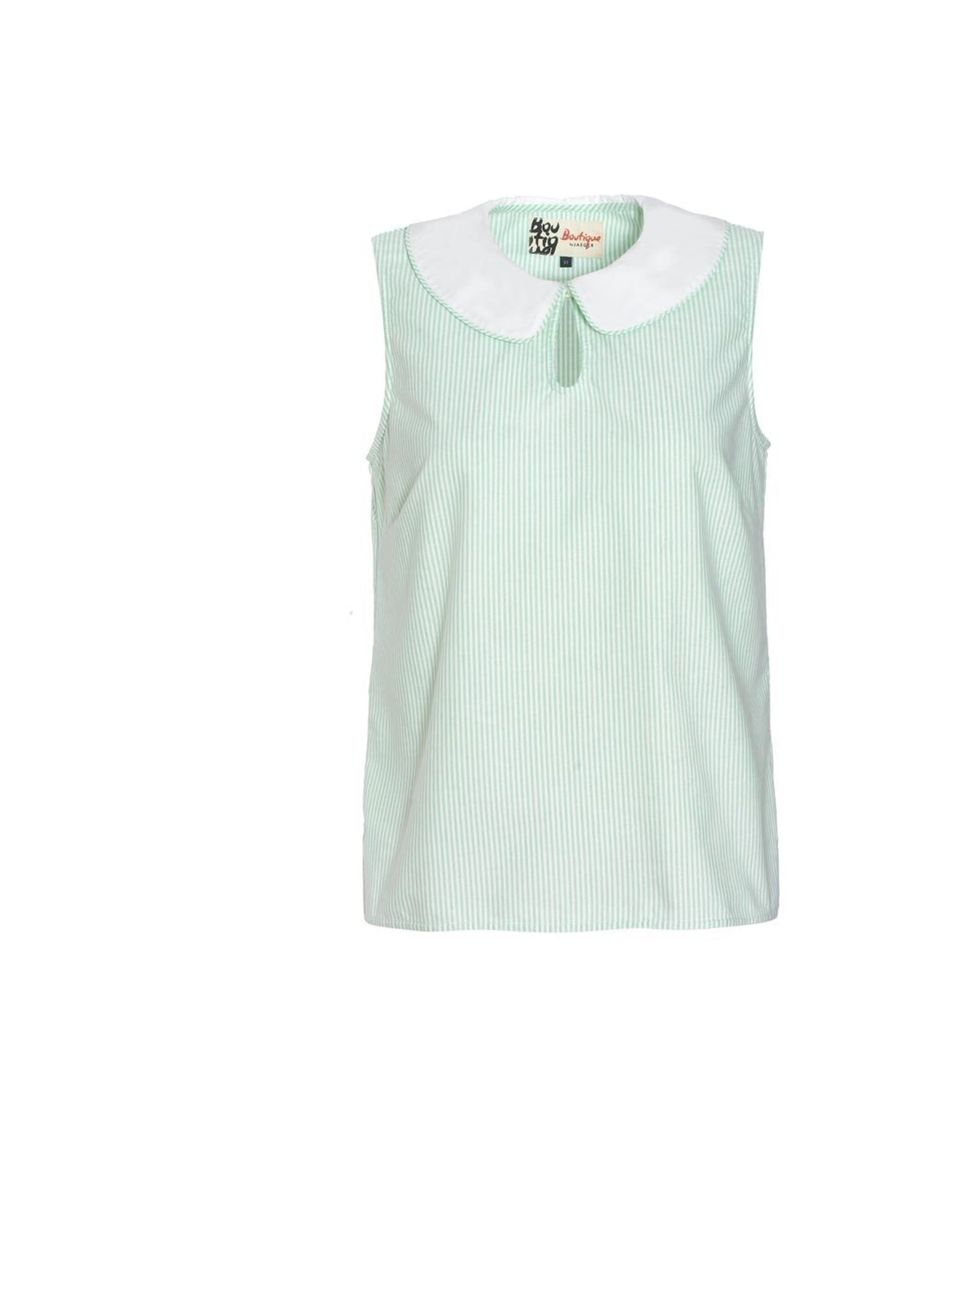 <p>Boutique by Jaeger top, £99, for stockists call 0845 051 0063</p>